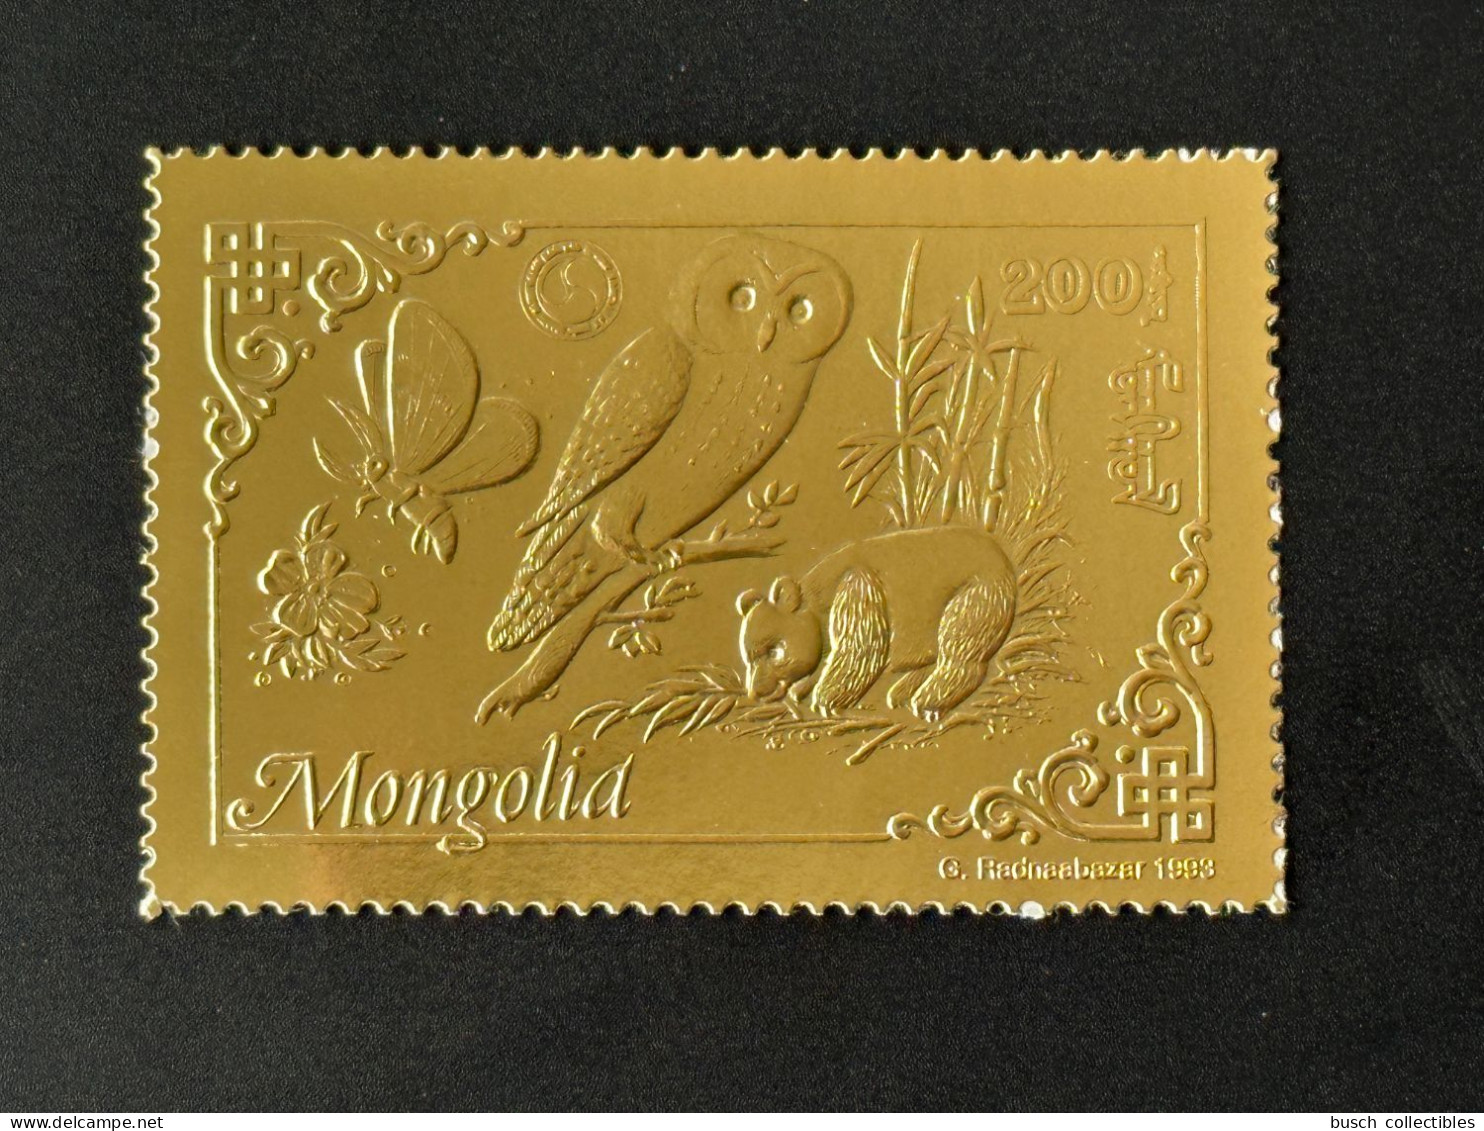 Mongolie Mongolia 1993 Mi. 2475 A Or Gold Rotary Lions Butterfly Owl Eule Panda Papillon Schmetterling Chouette - Ours